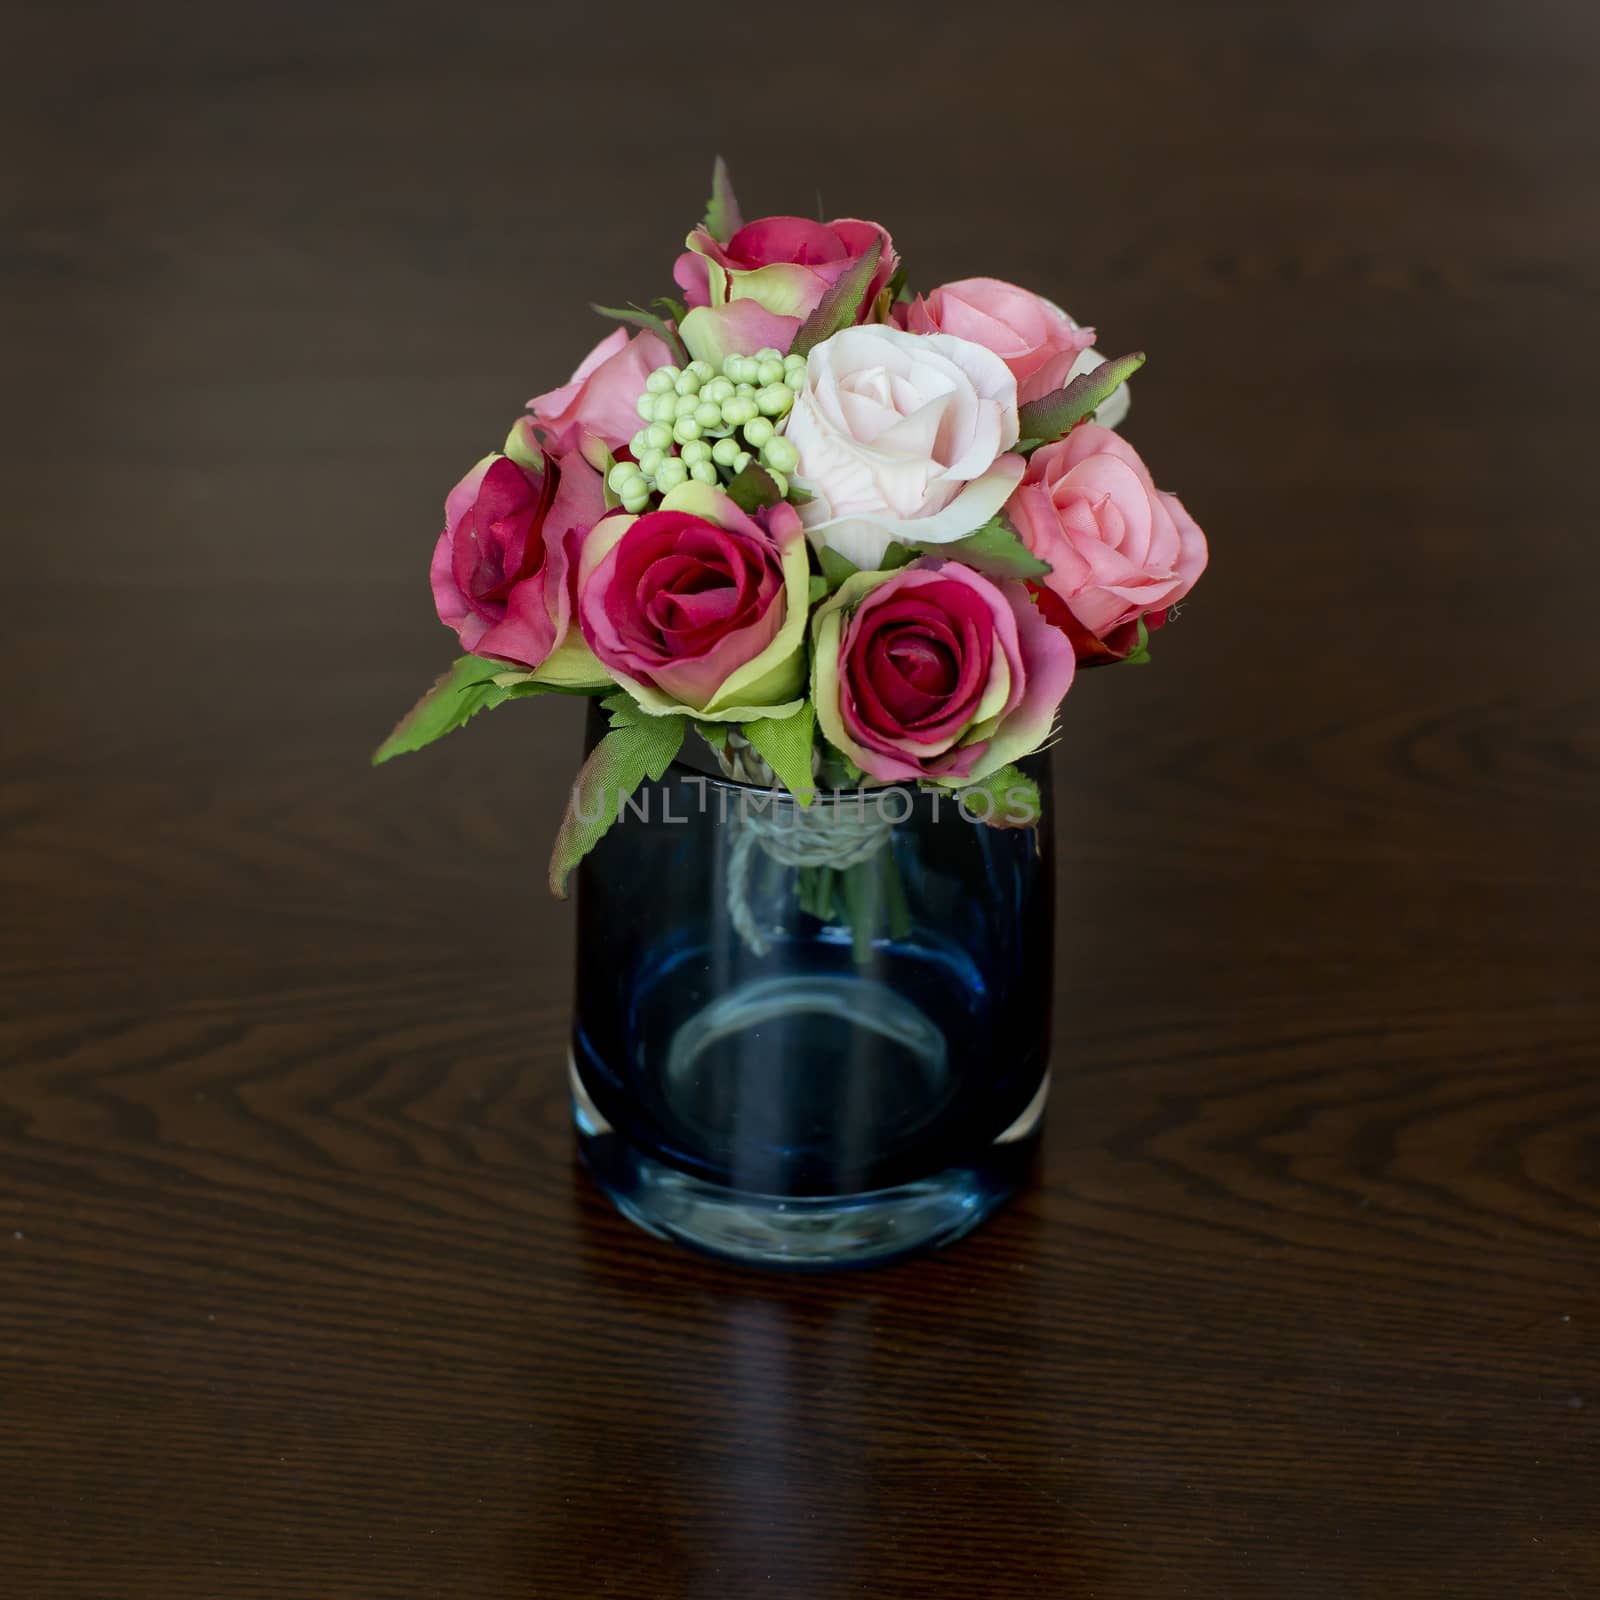 Glass vase with flowers, a beautiful ornament in a wedding